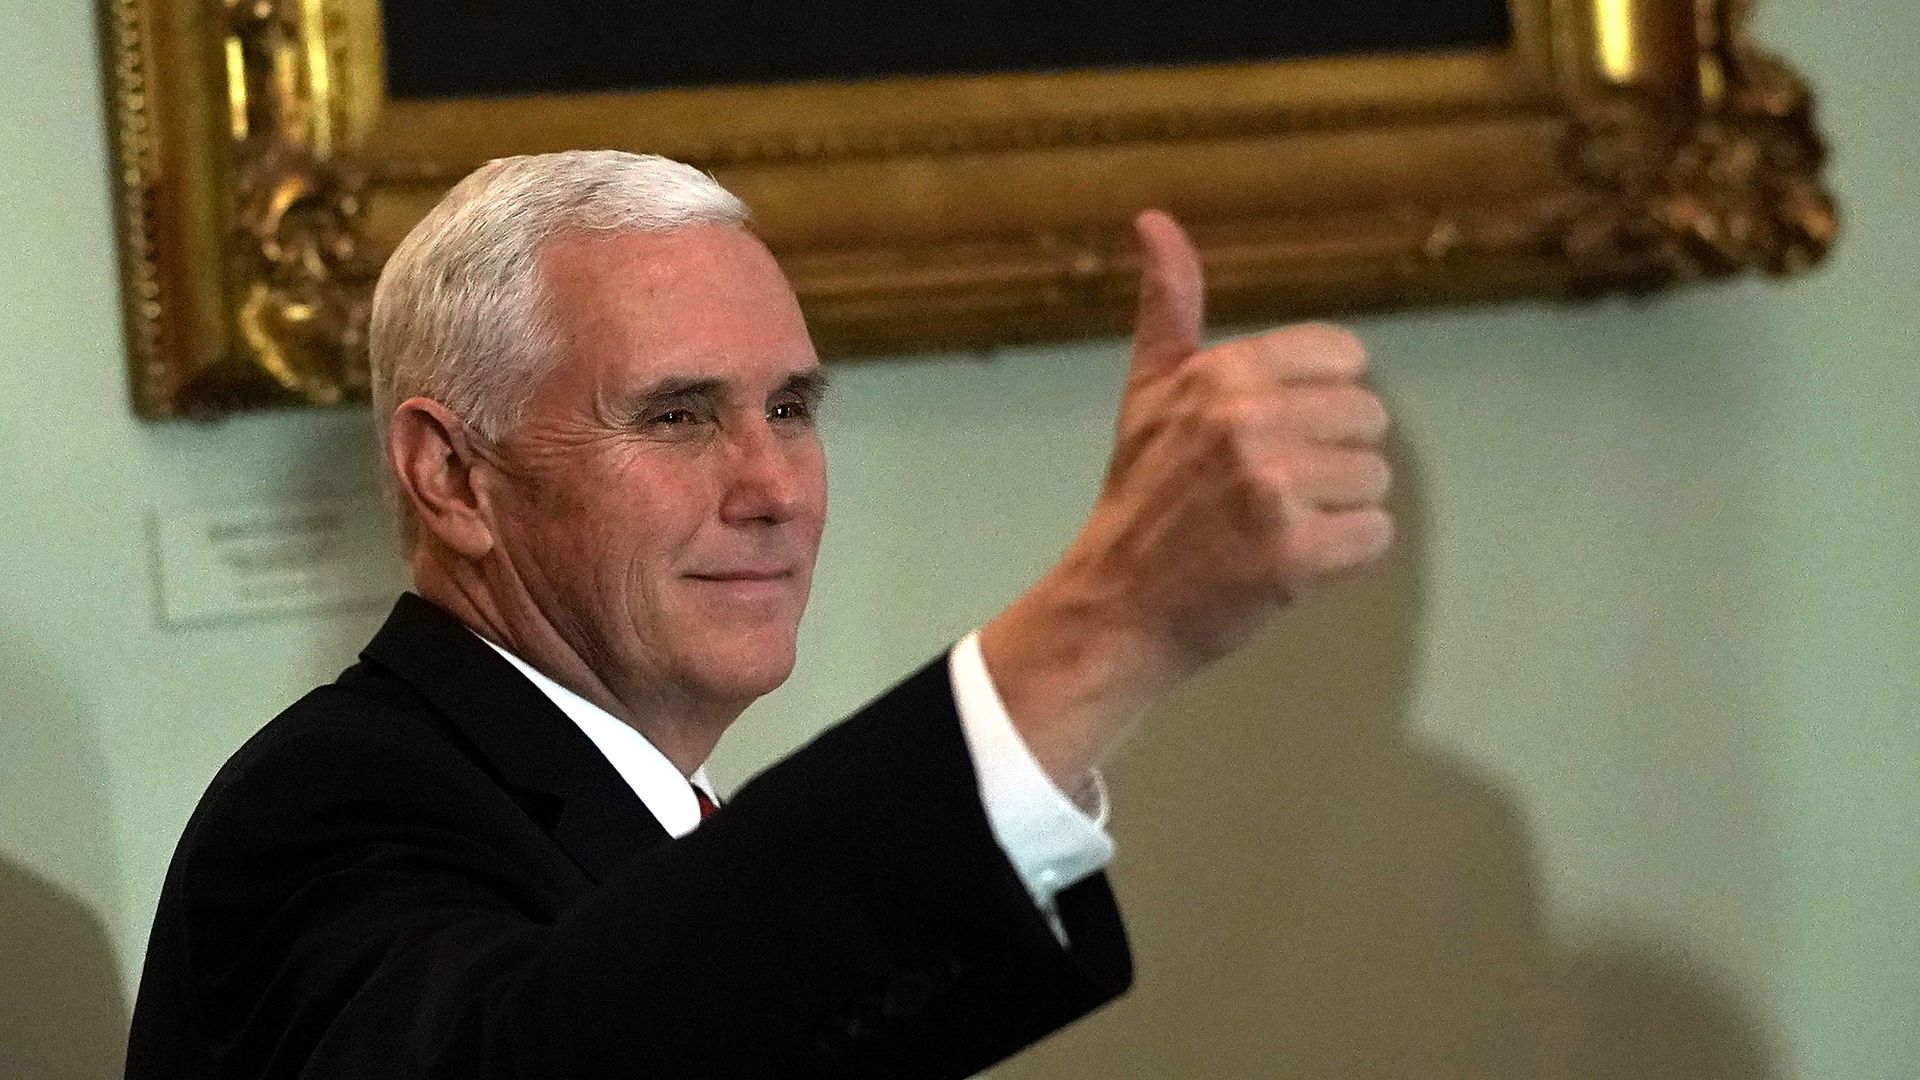 Pence giving a thumbs up